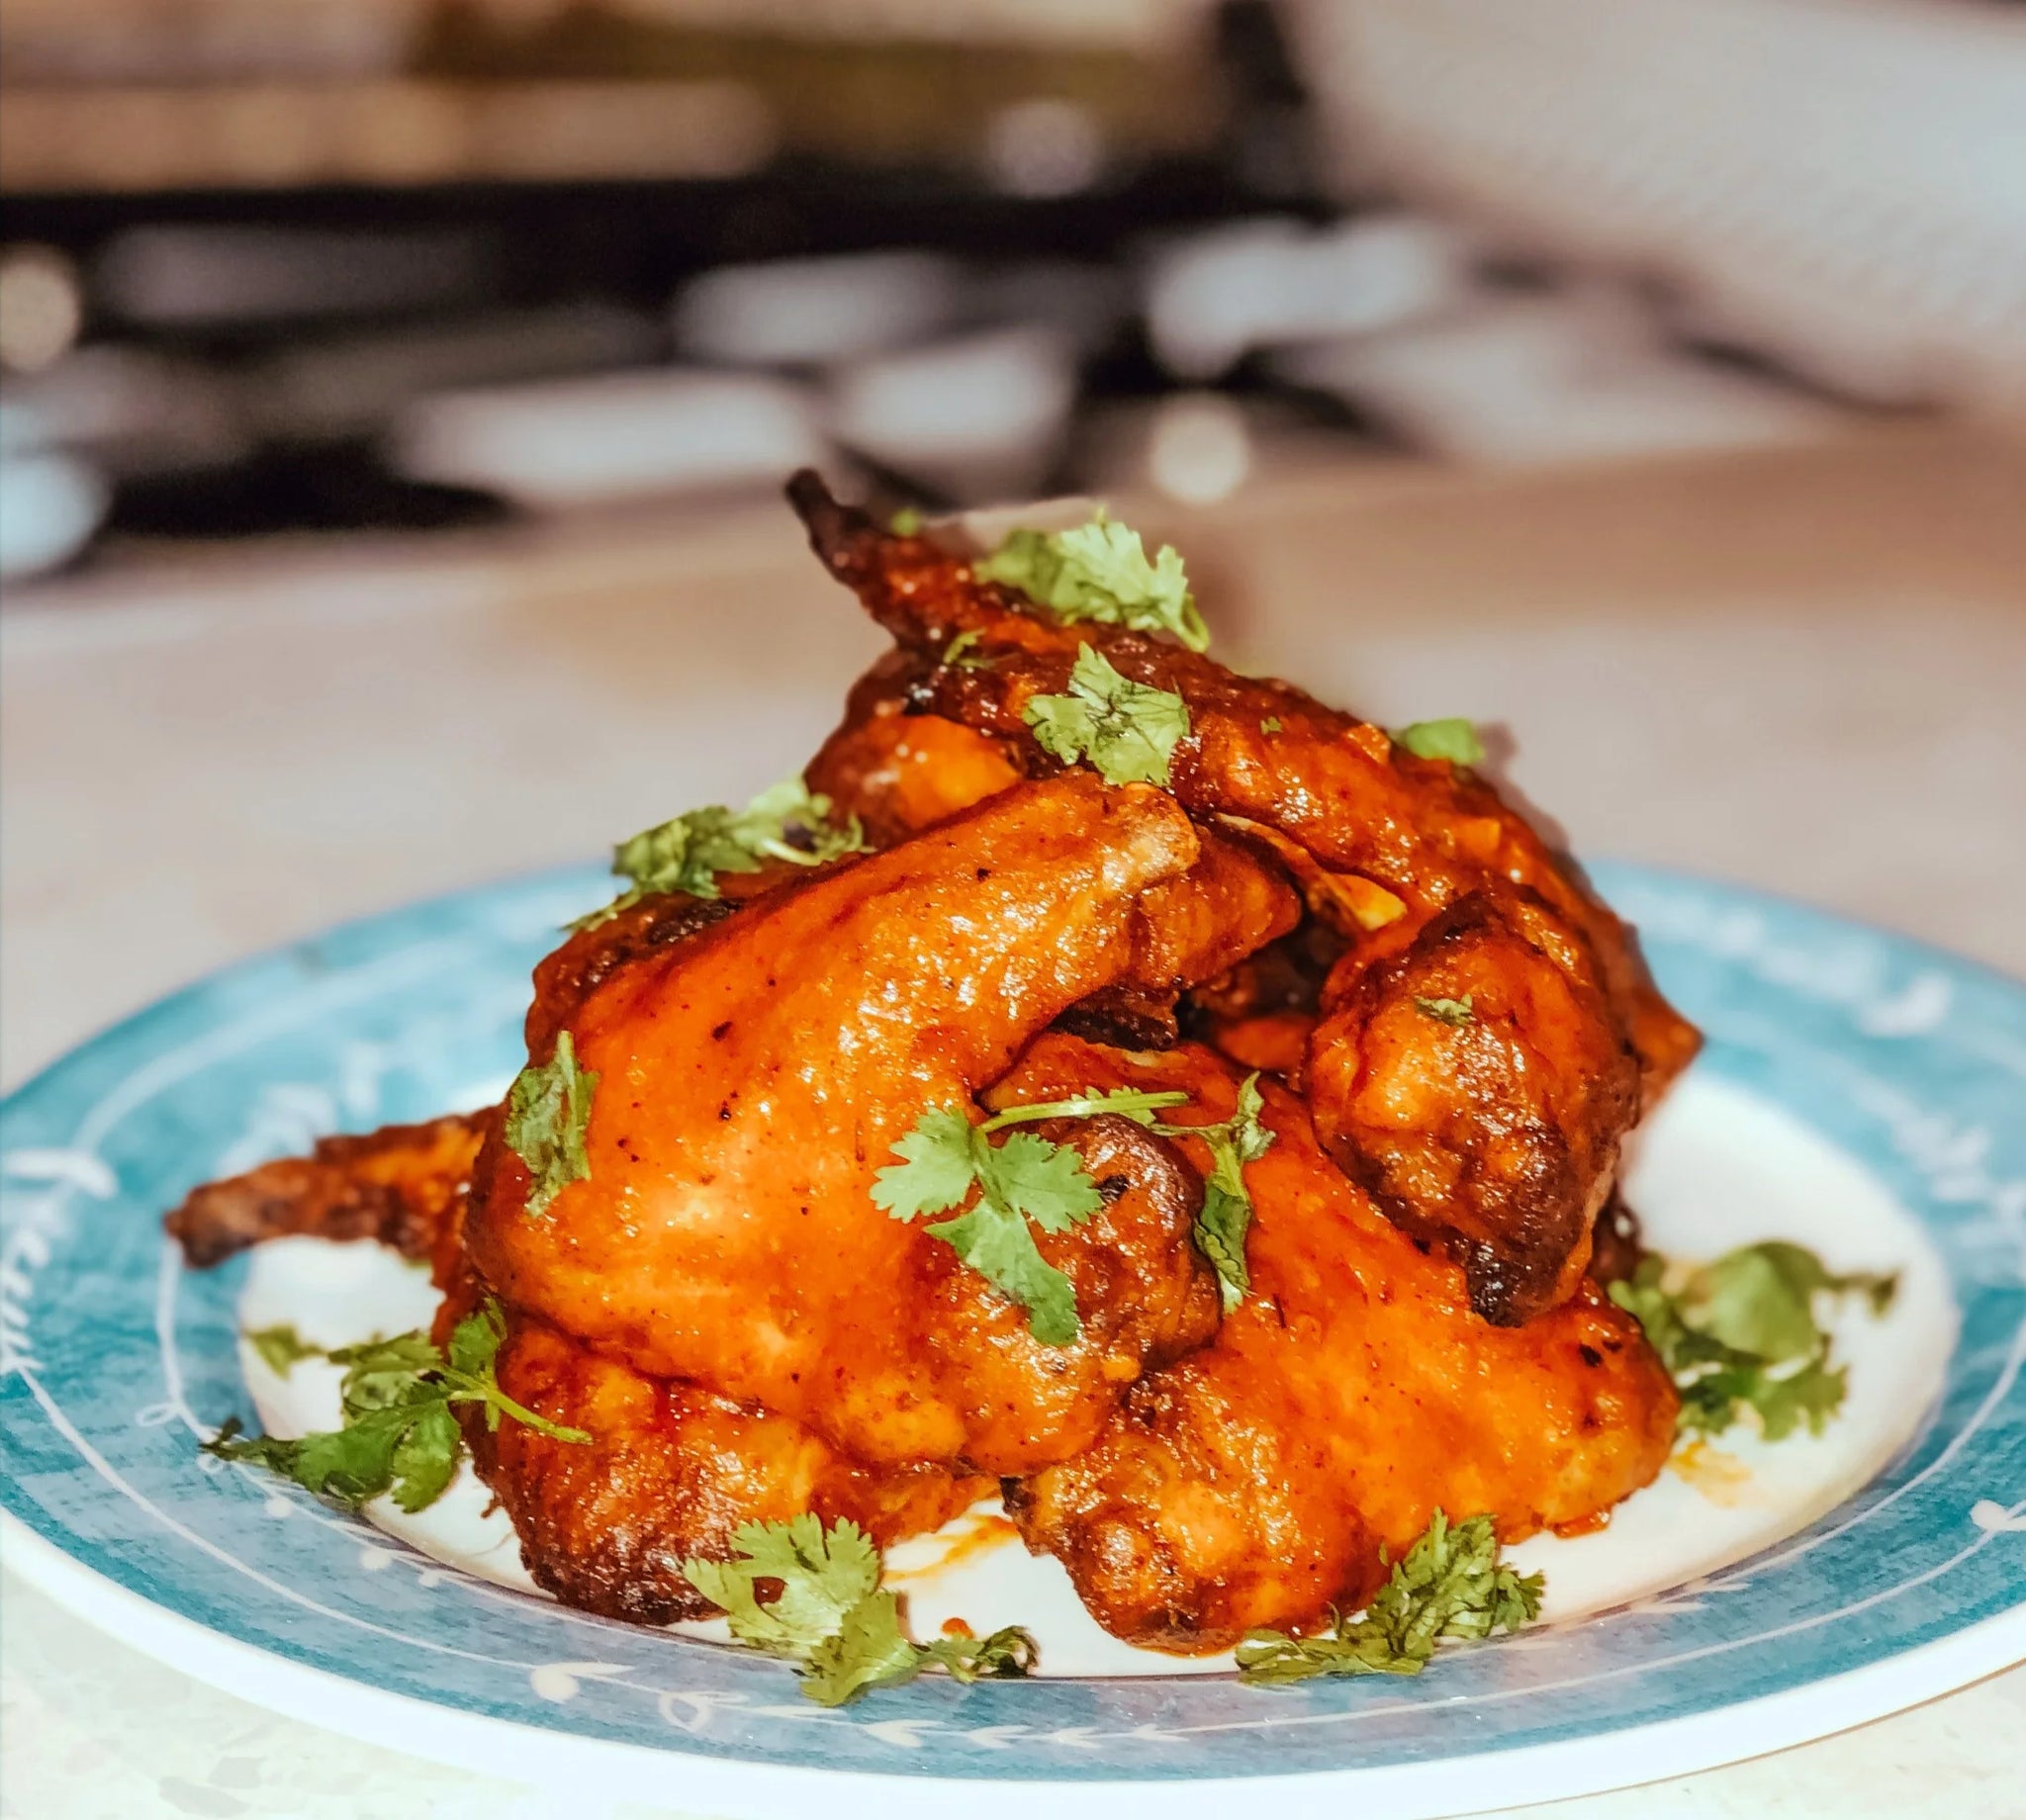 Baked nandos style chicken wings